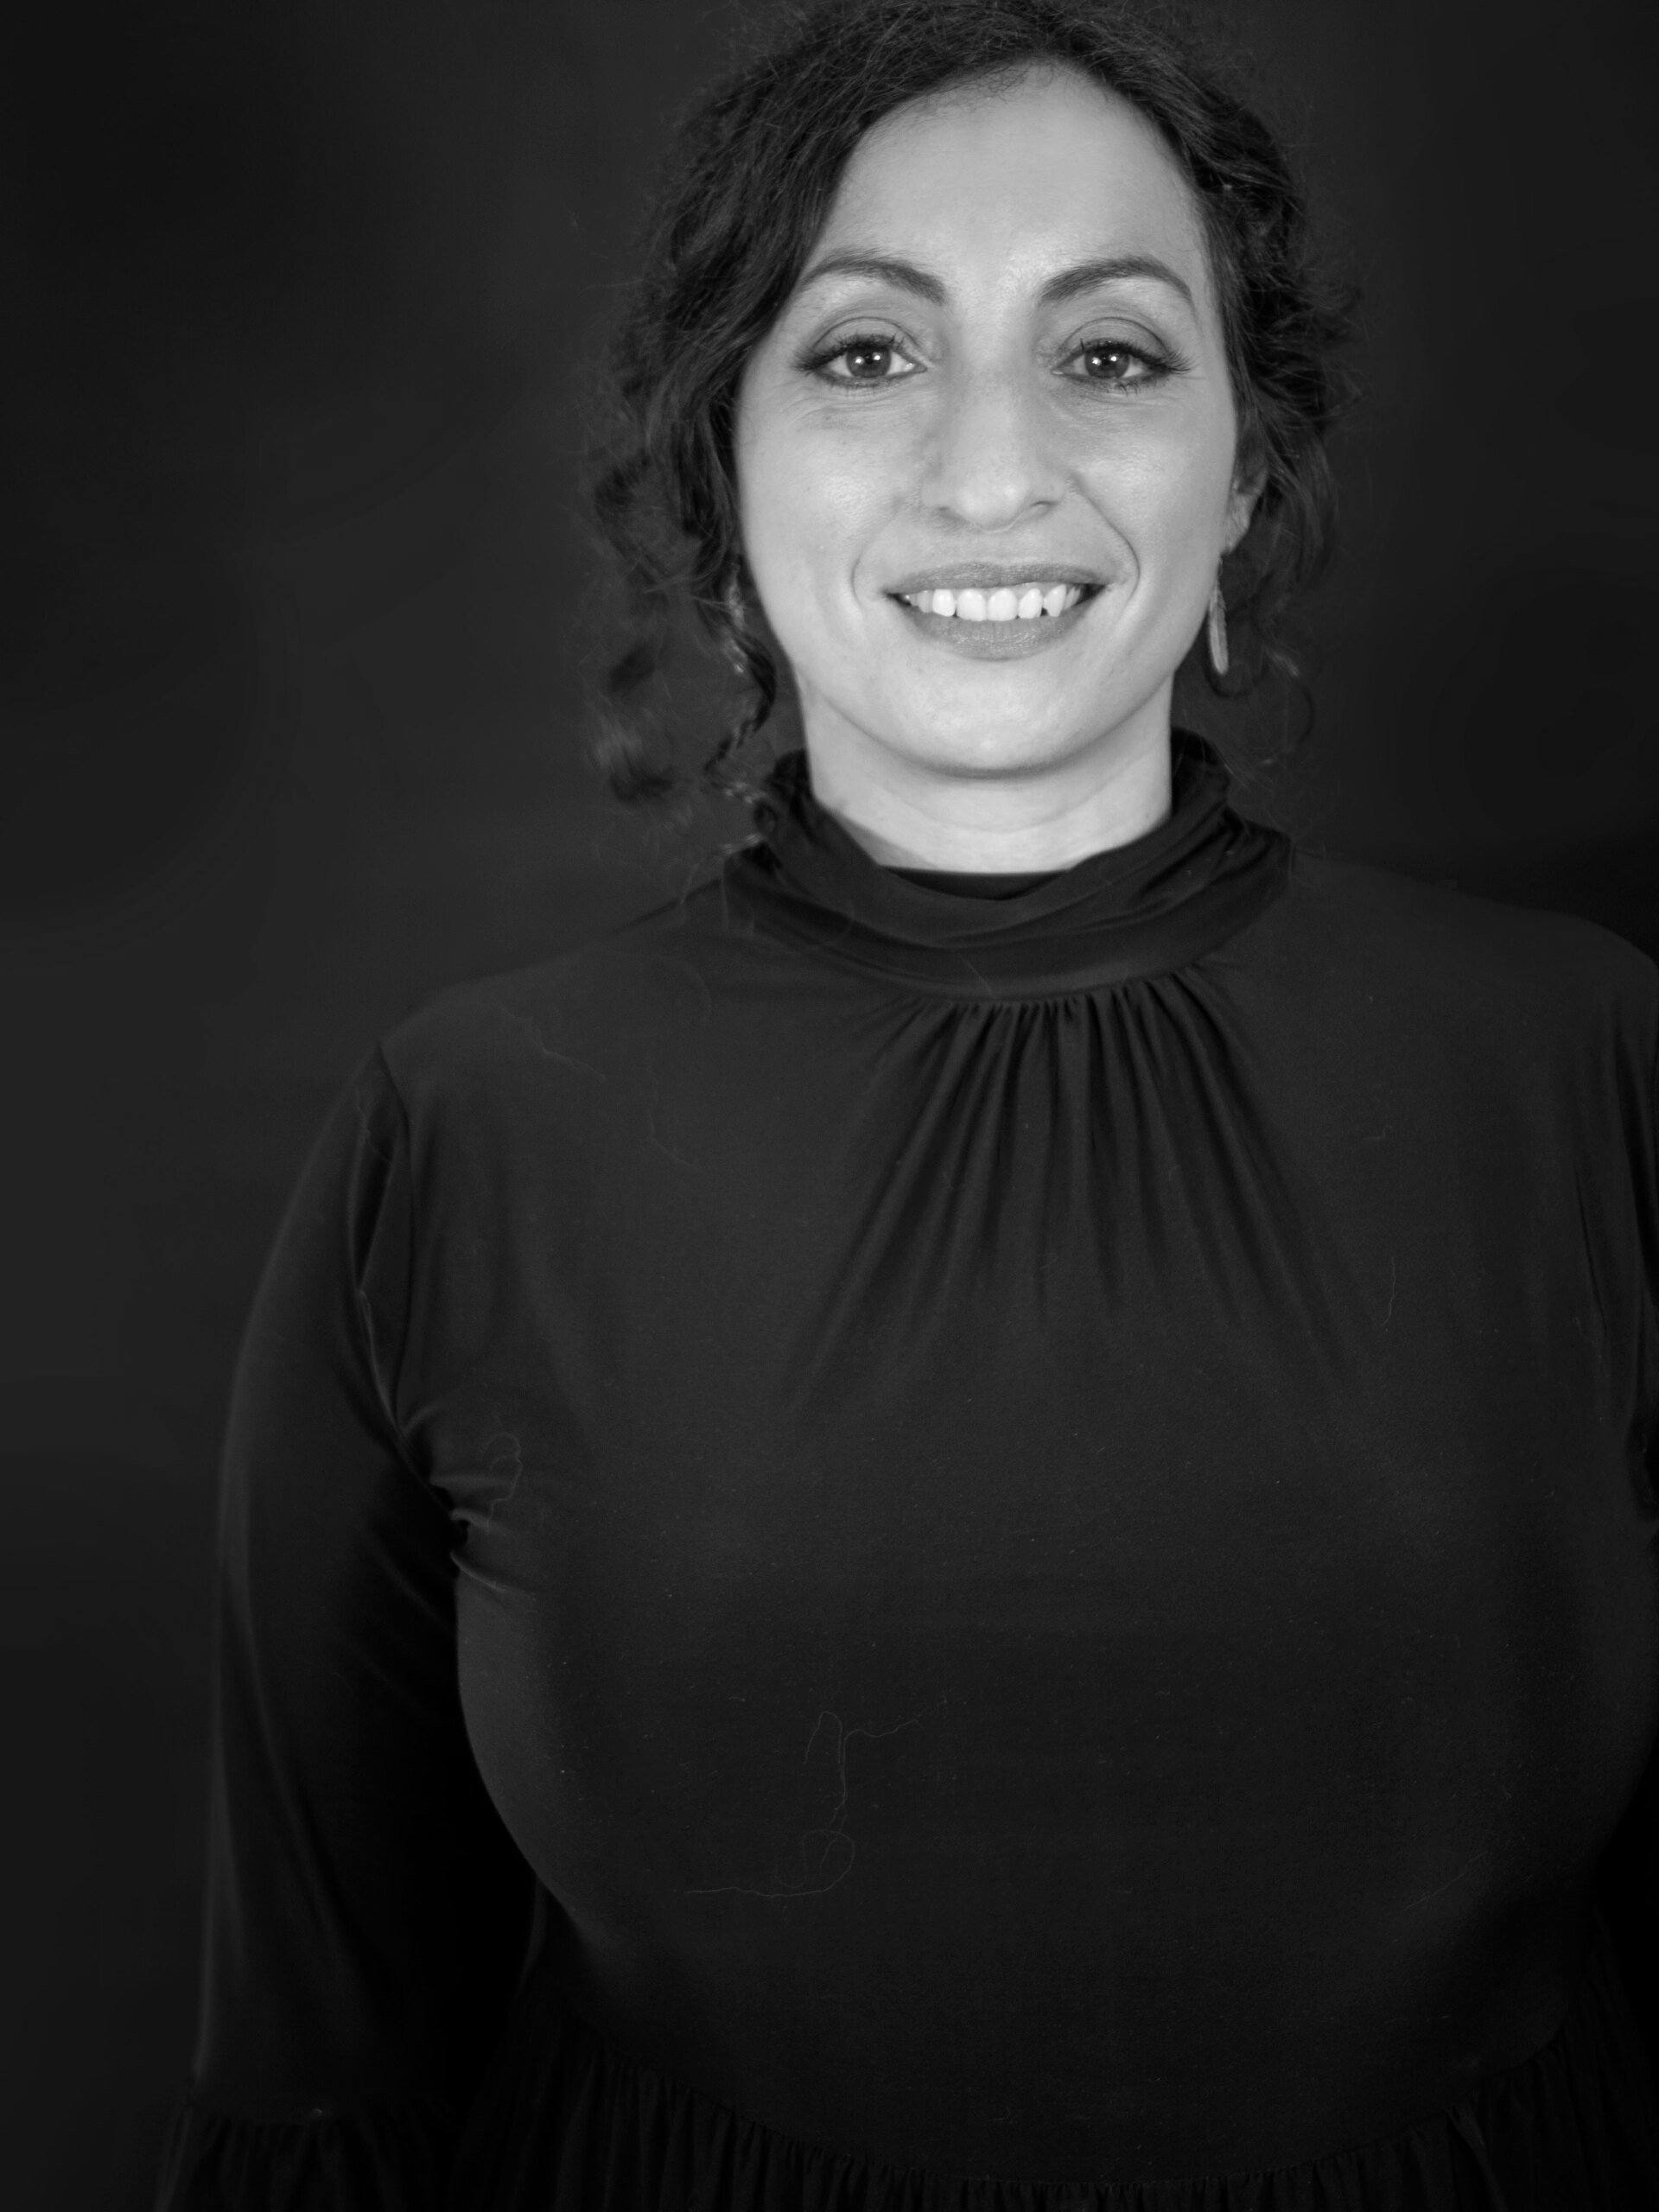 A woman in a black shirt is smiling in a black and white photo.